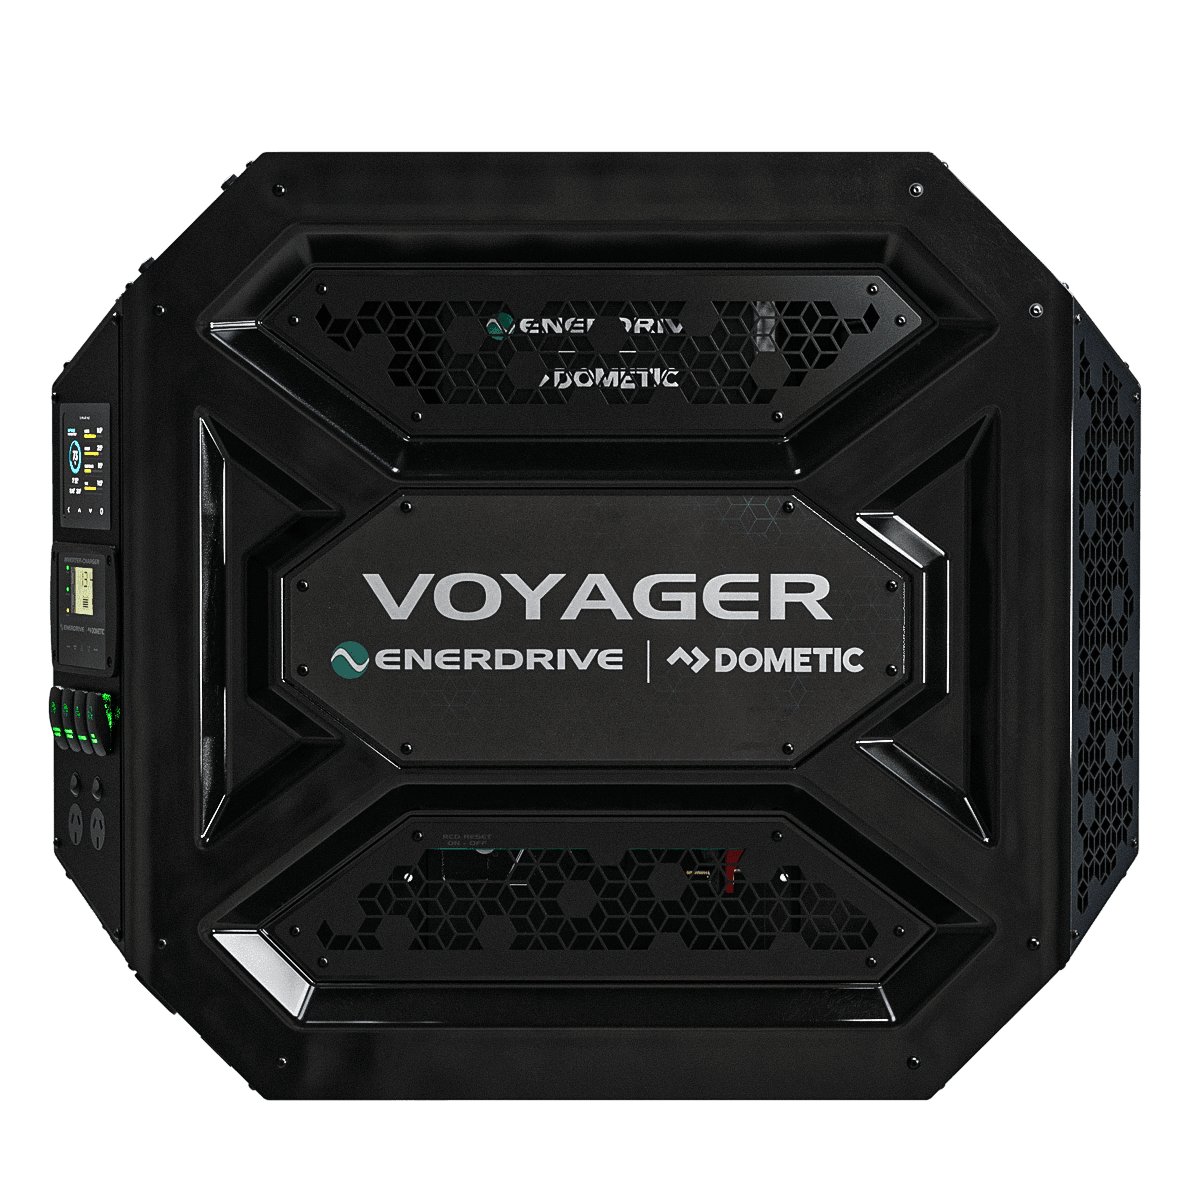 Voyager System Left 3000W/100A Inverter-Charger 40DC INC SIMARINE SCQ50 Power Systems